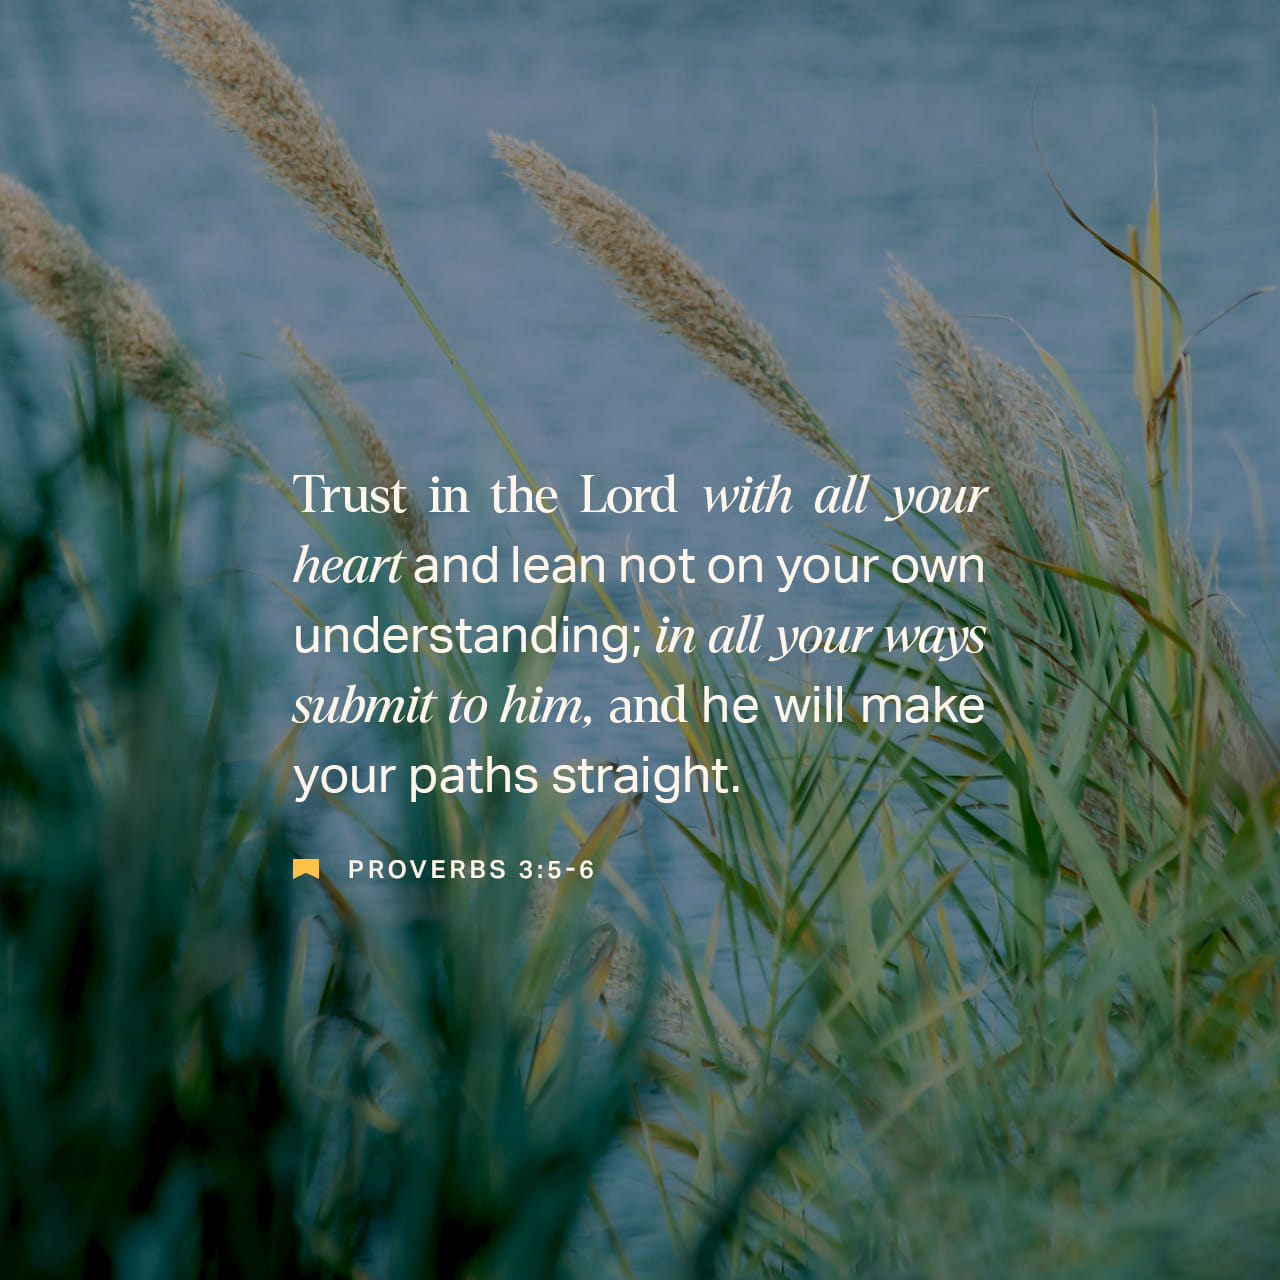 Trust in the Lord with All Your Heart - Proverbs 3:5 Meaning